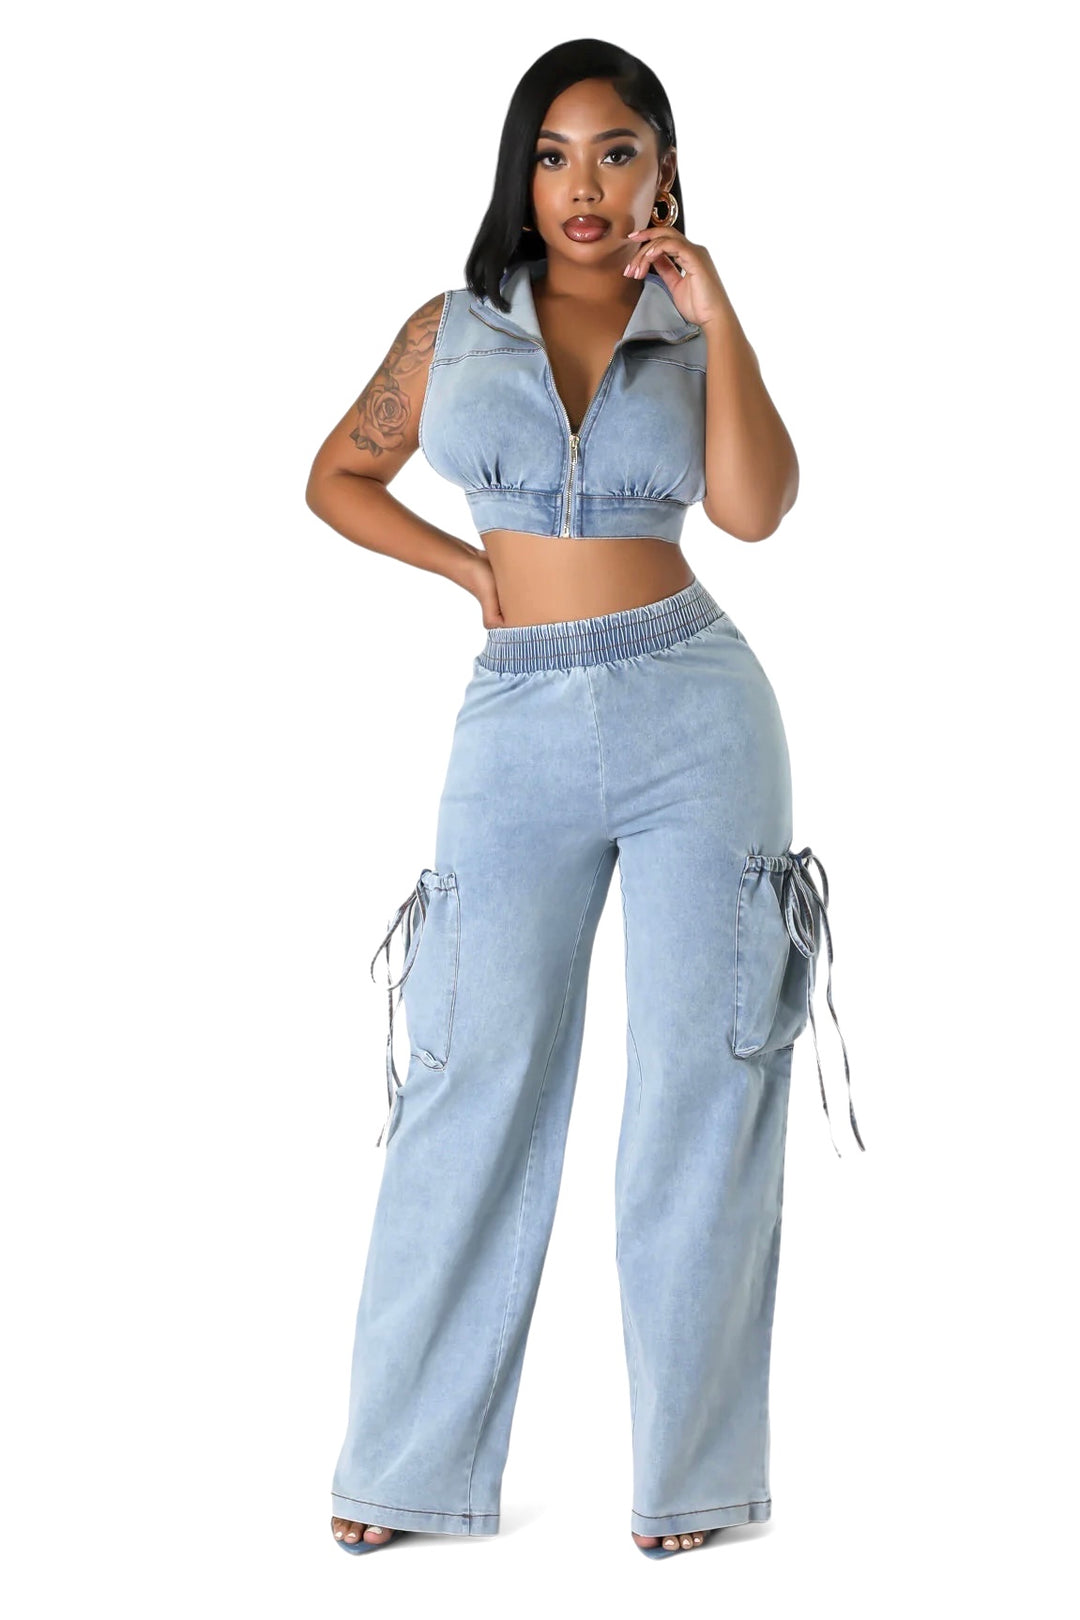 a woman in a crop top and jeans posing for a picture